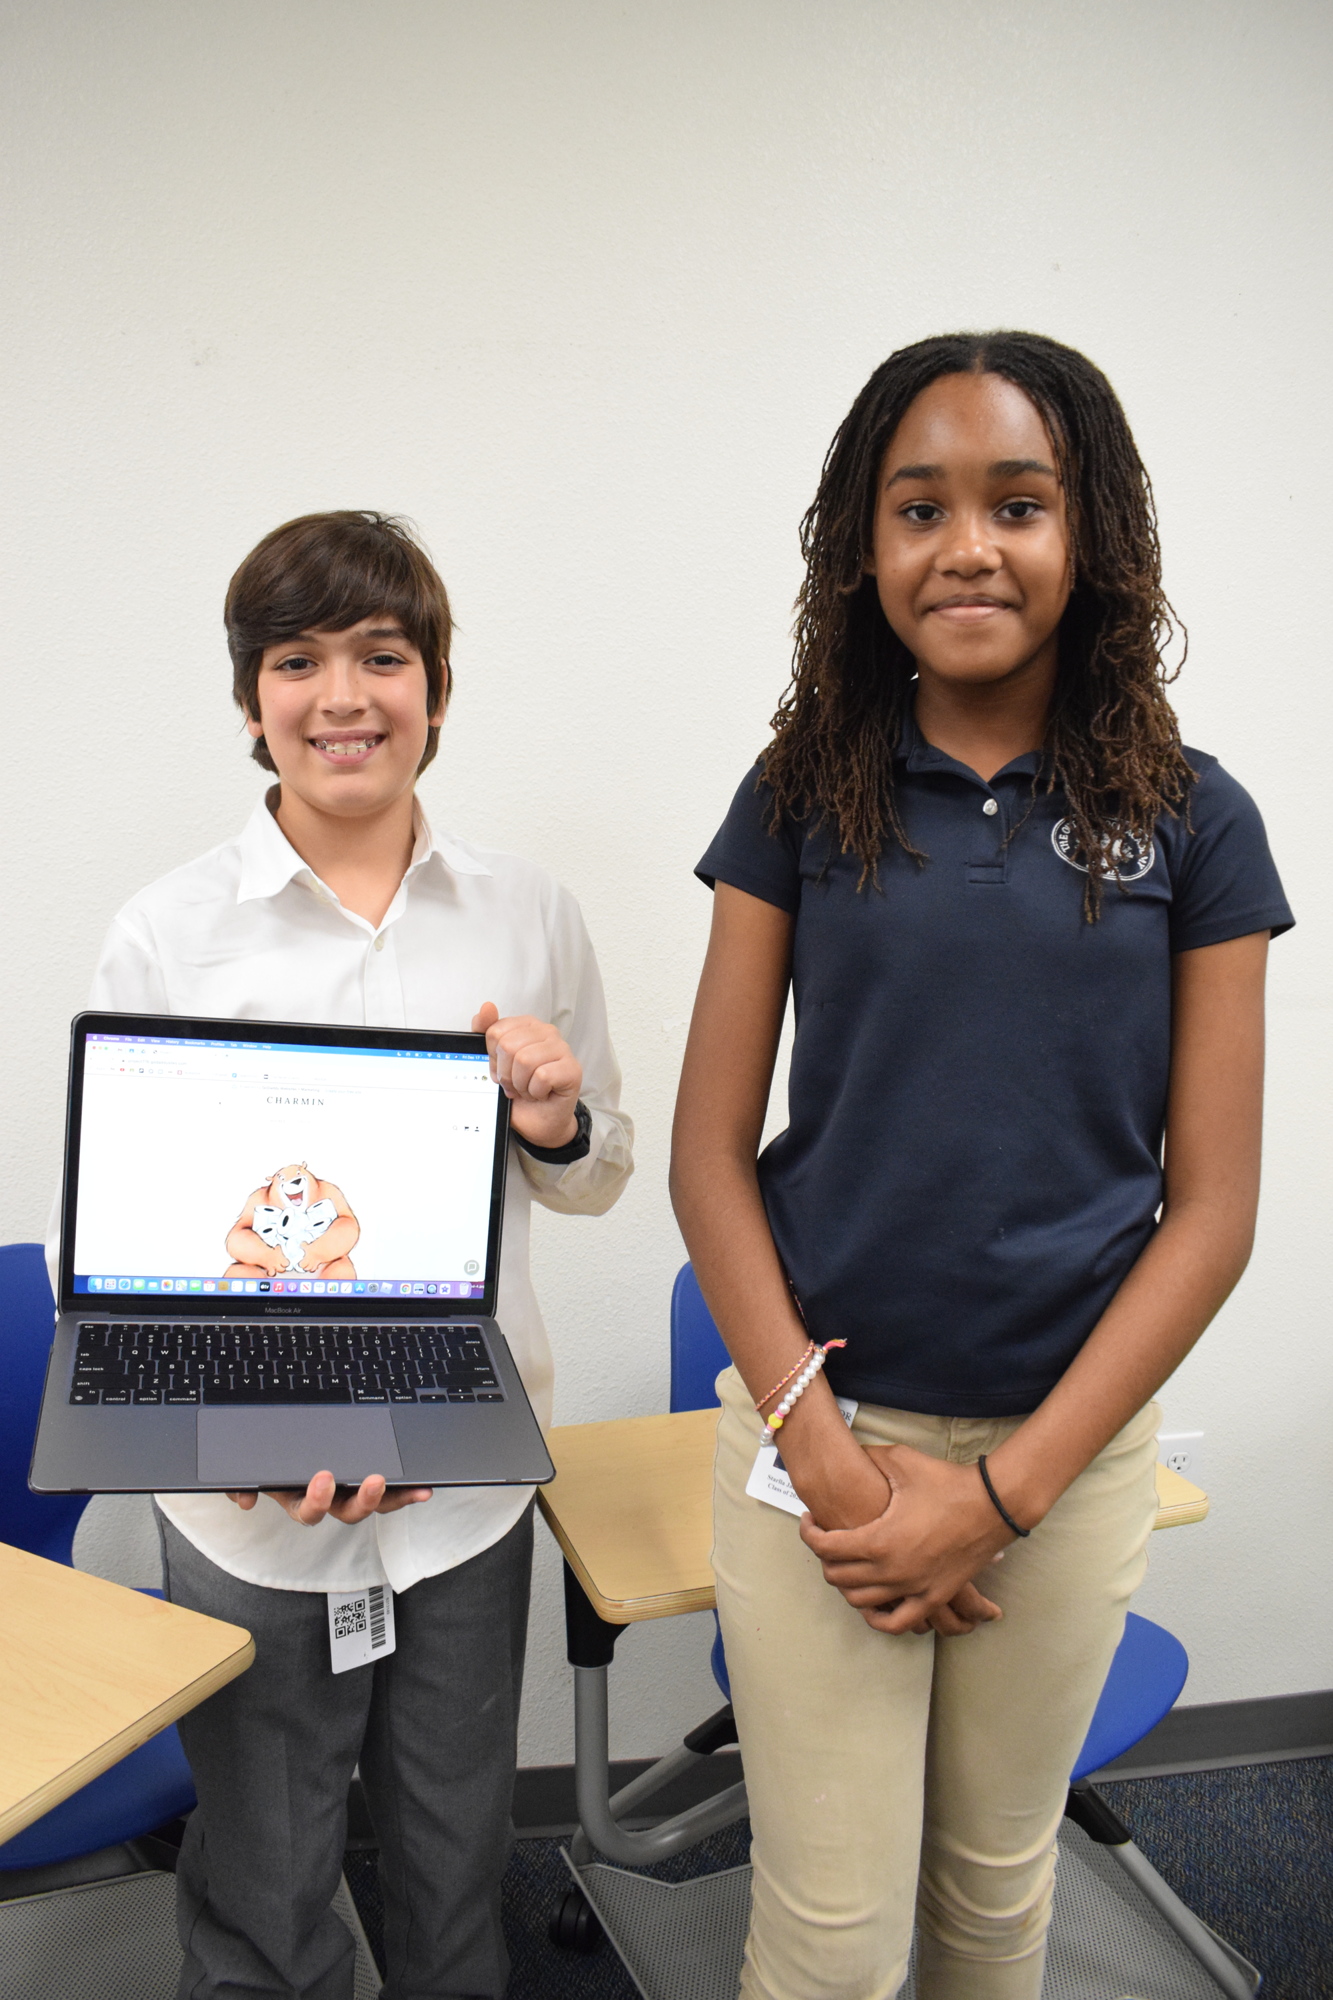 Eighth grader Jason Luedeke and sixth grader Starlla Jackson create a website to show off the jingle they created for a Charmin commercial.